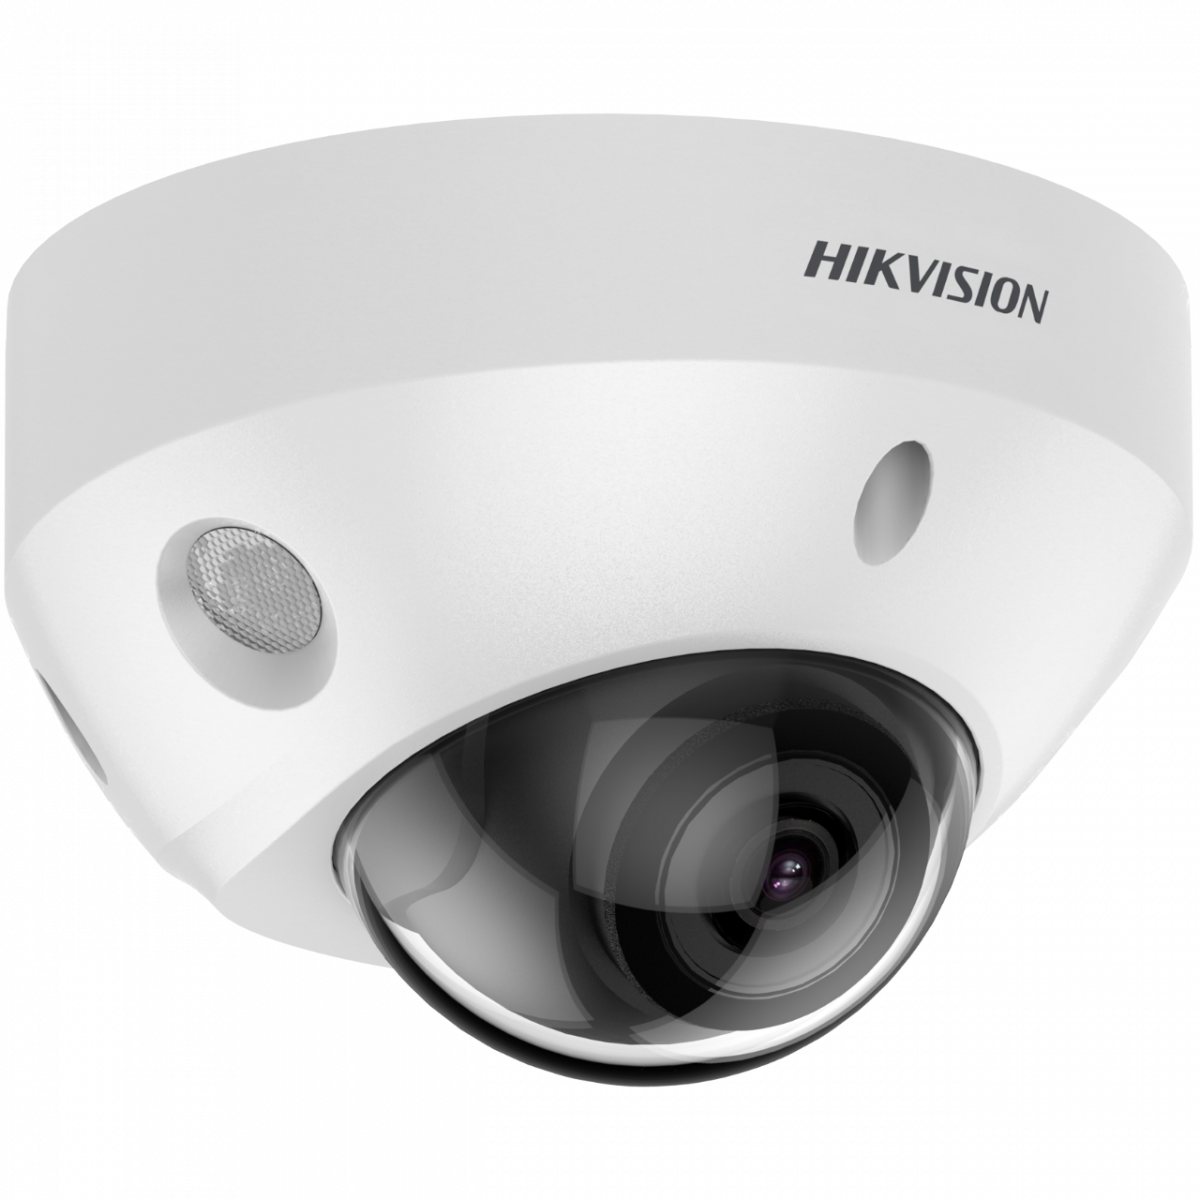 HIKVISION | Camera IP Compact
Dome 4MP 2.8MM ColorVu IR
Audio